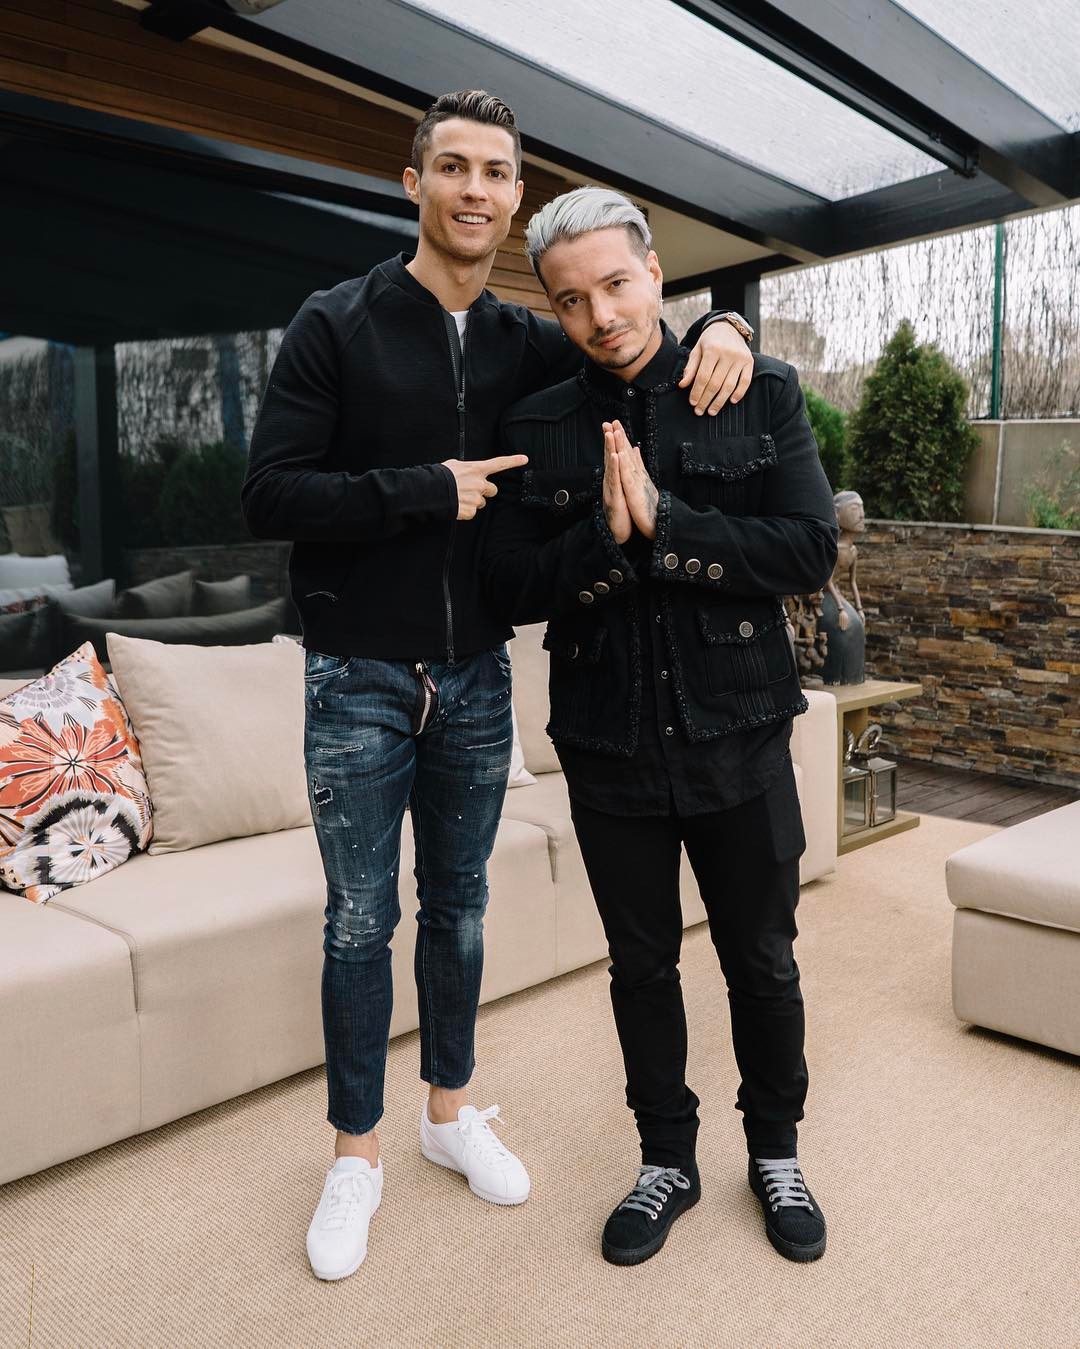 SPOTTED: Cristiano Ronaldo In Nike Jacket And Sneakers And J Balvin In Chanel